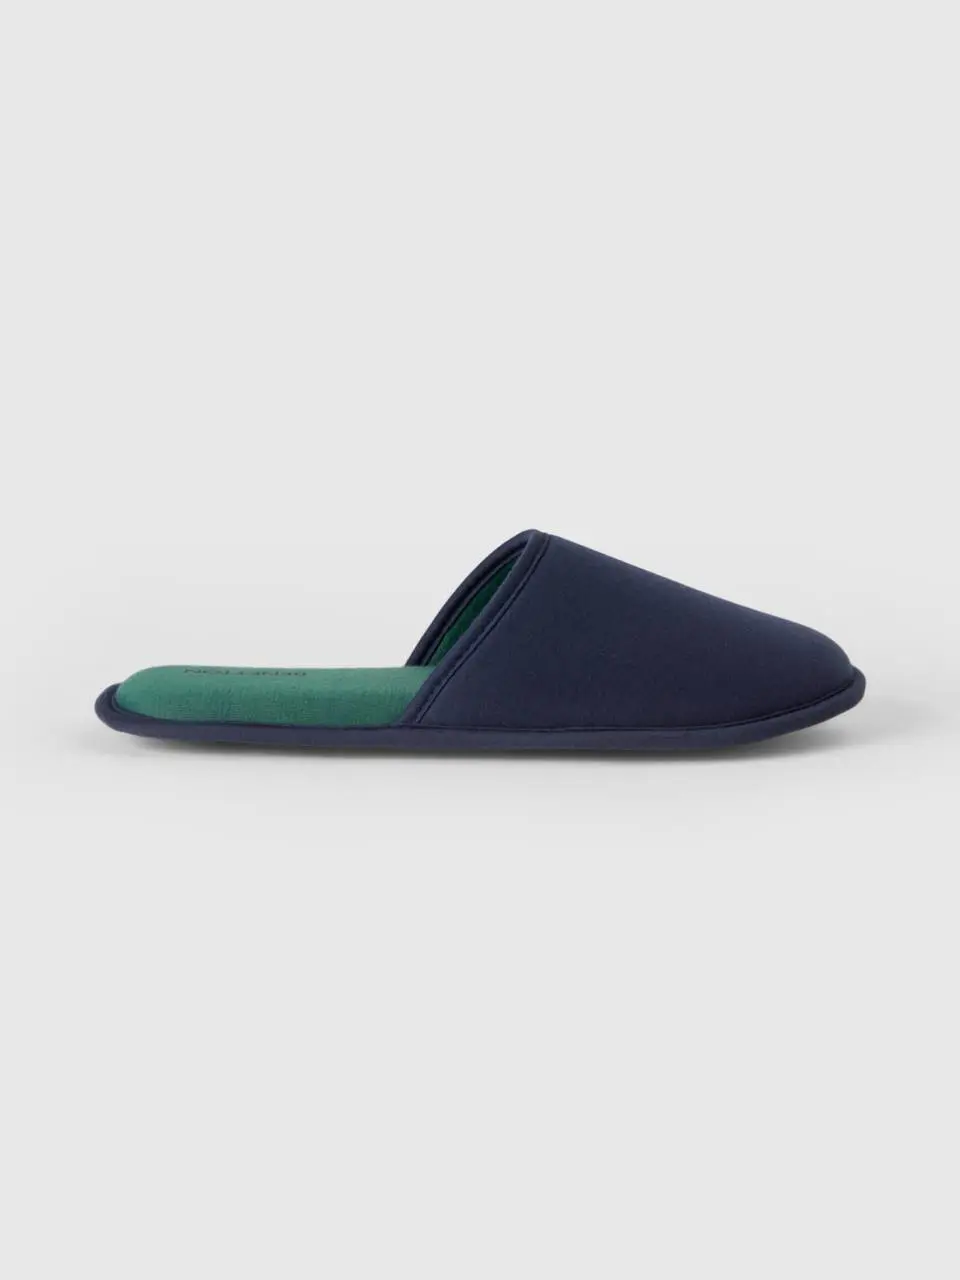 Benetton blue and green slippers. 1